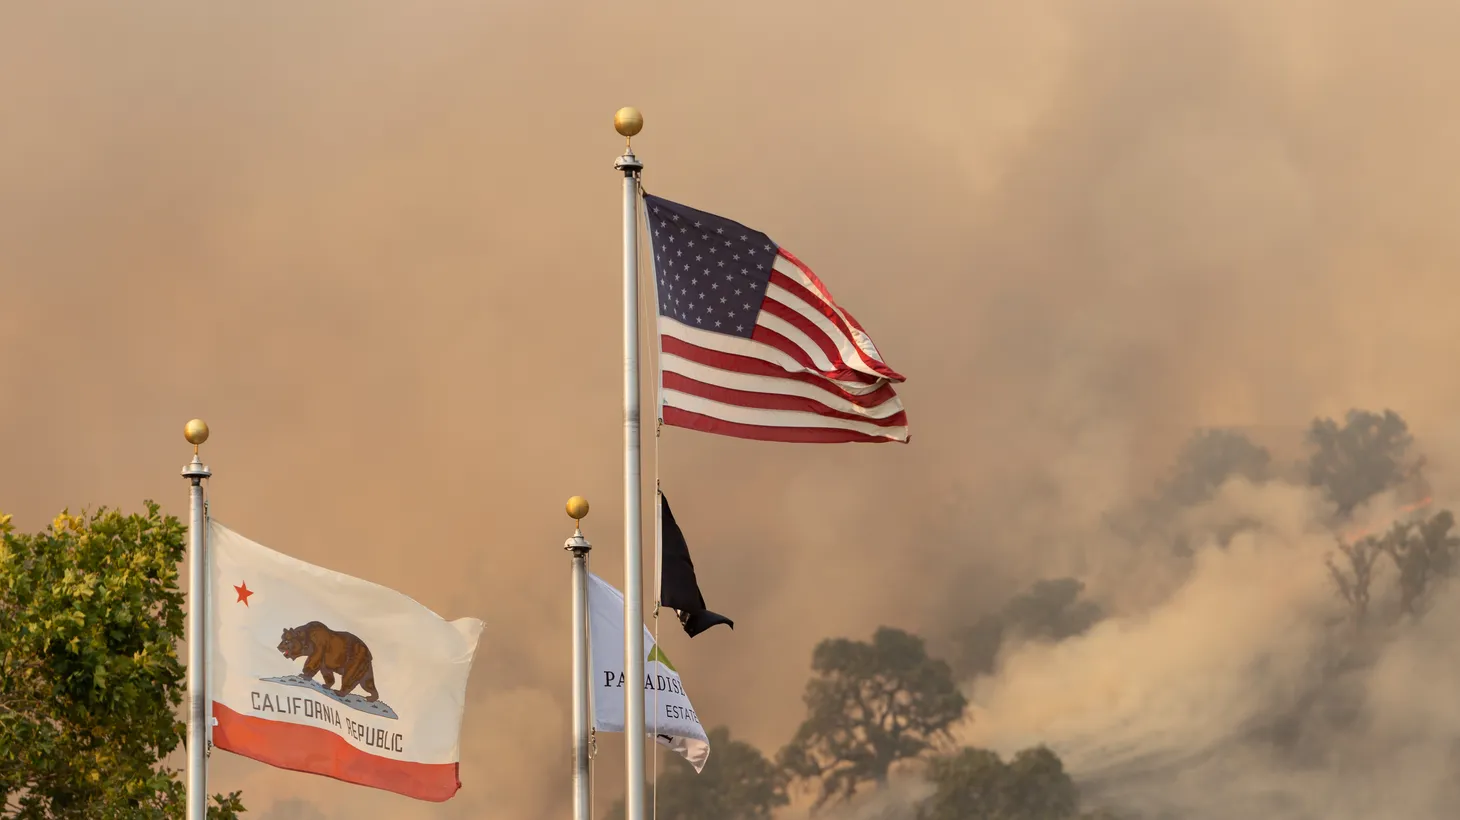 Smoke from a wildfire behind the California state flag.